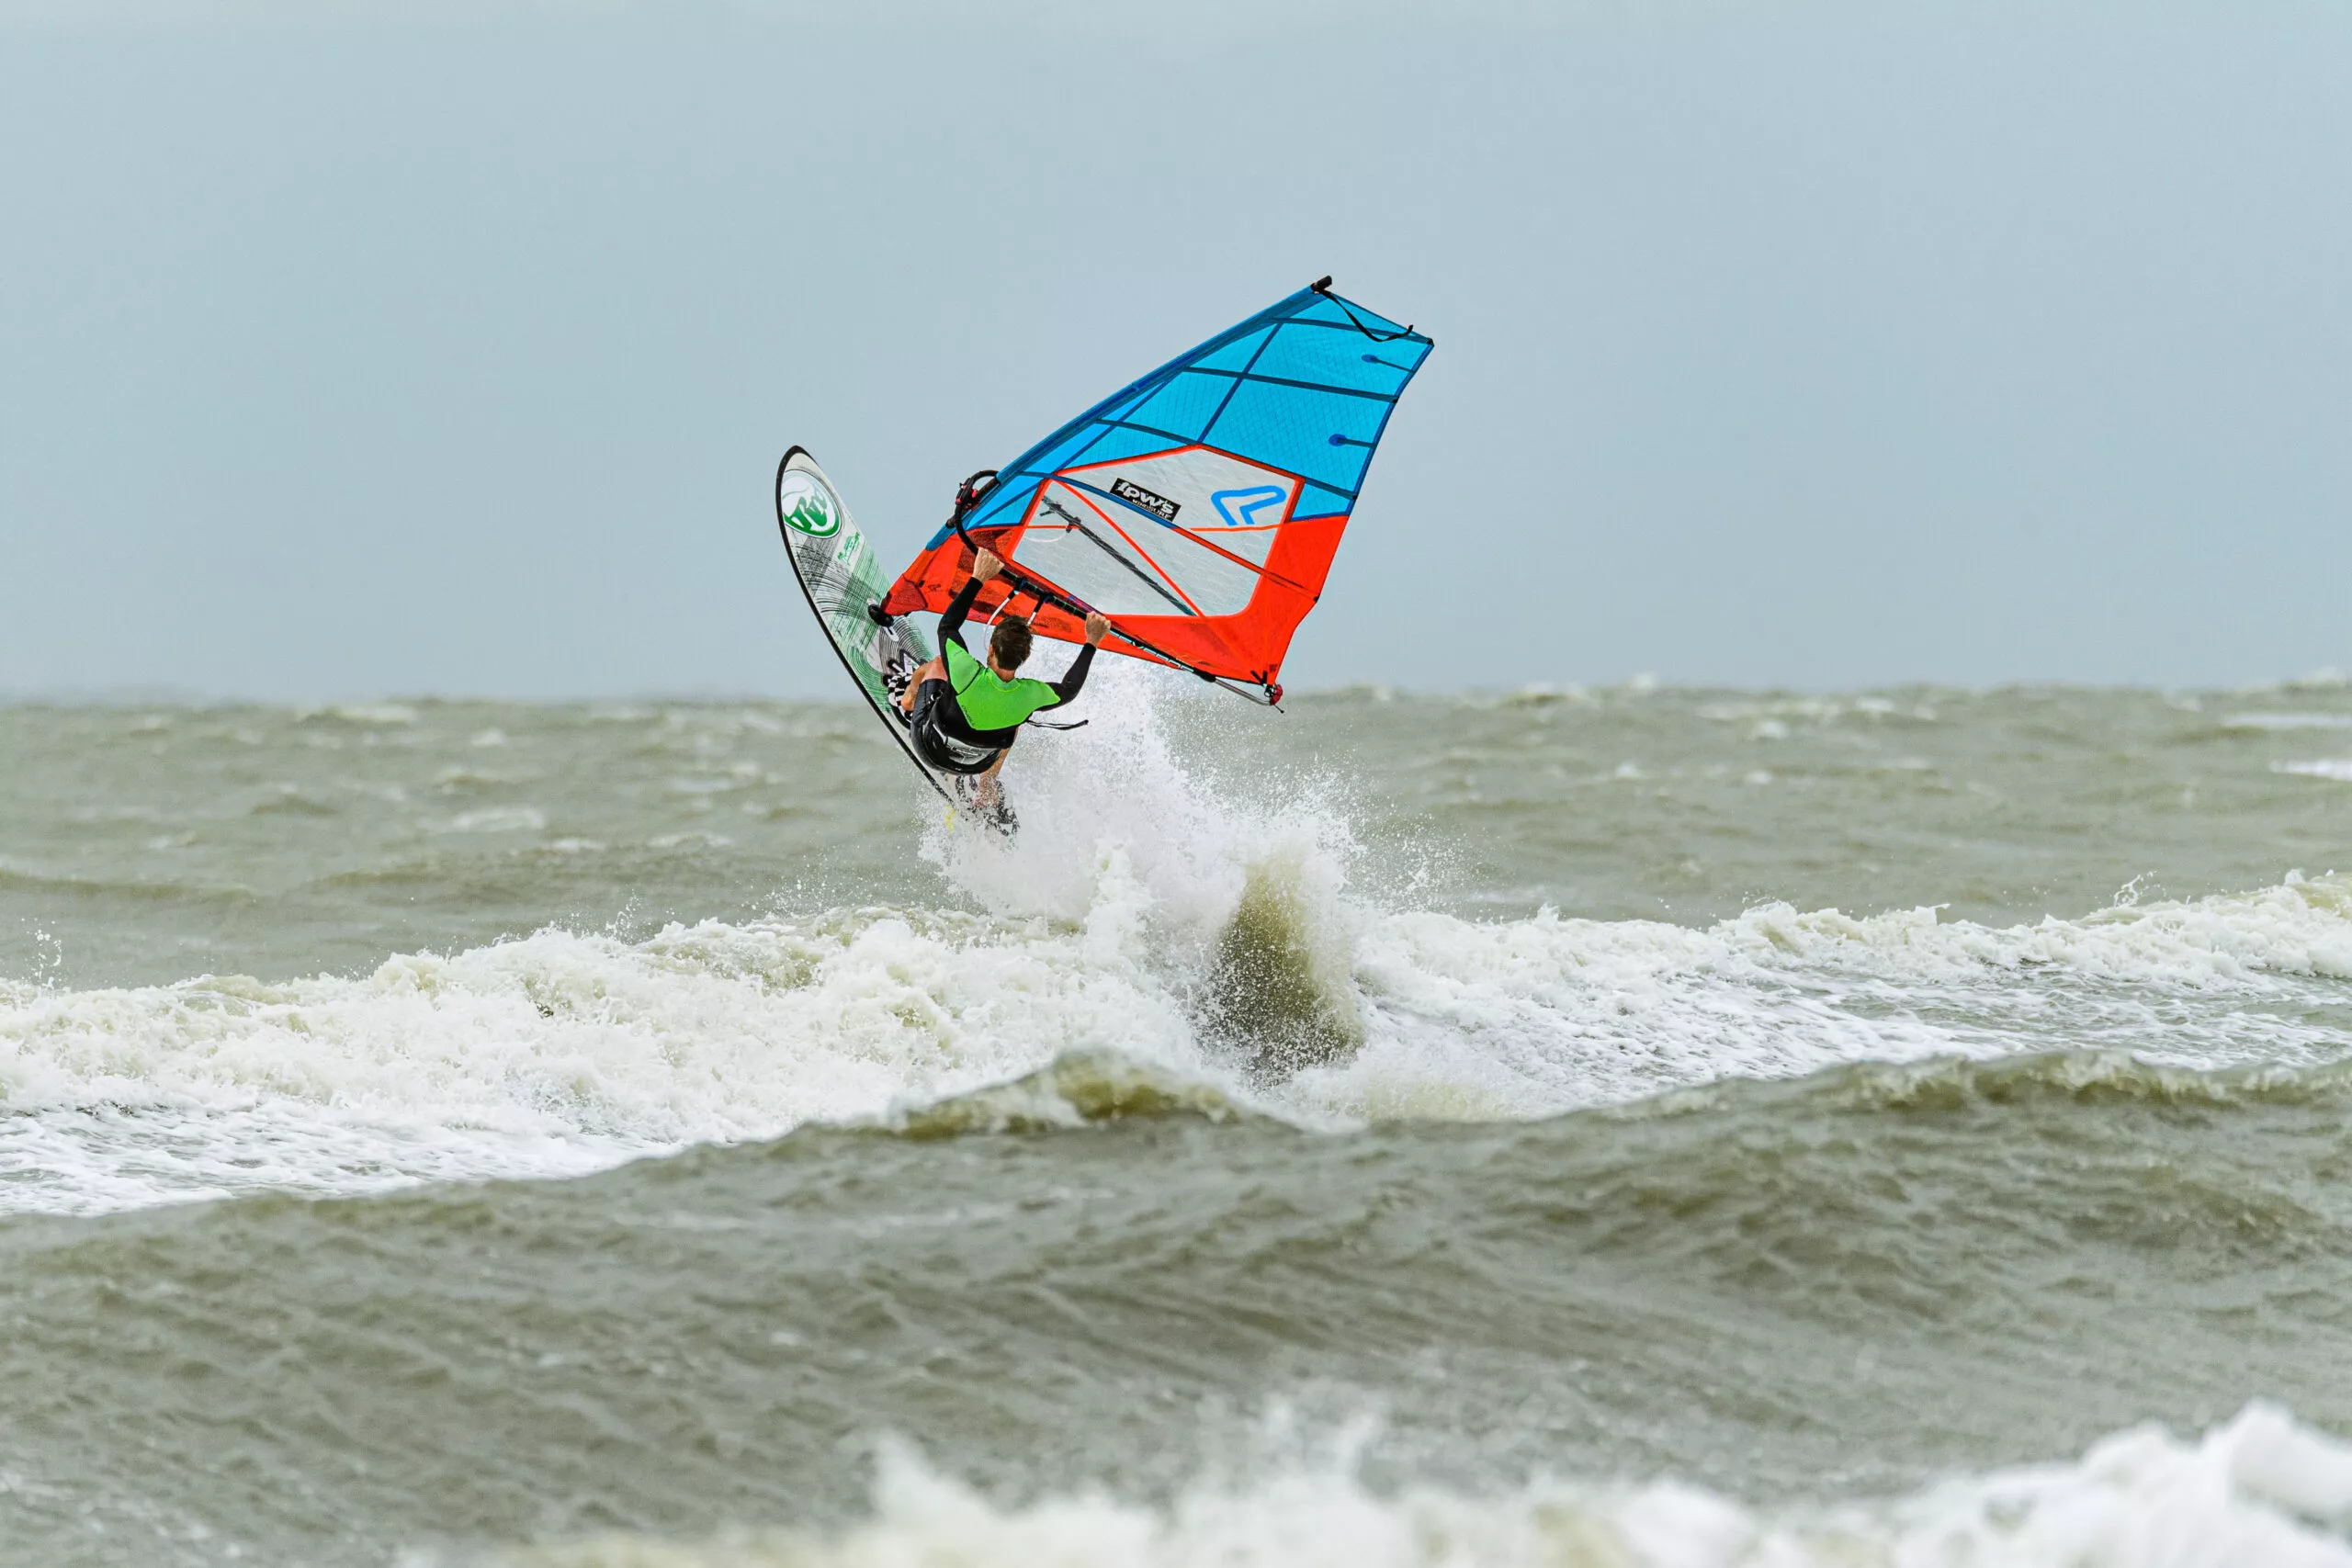 Absolut Surf in Belgium, Europe | Windsurfing - Rated 1.2